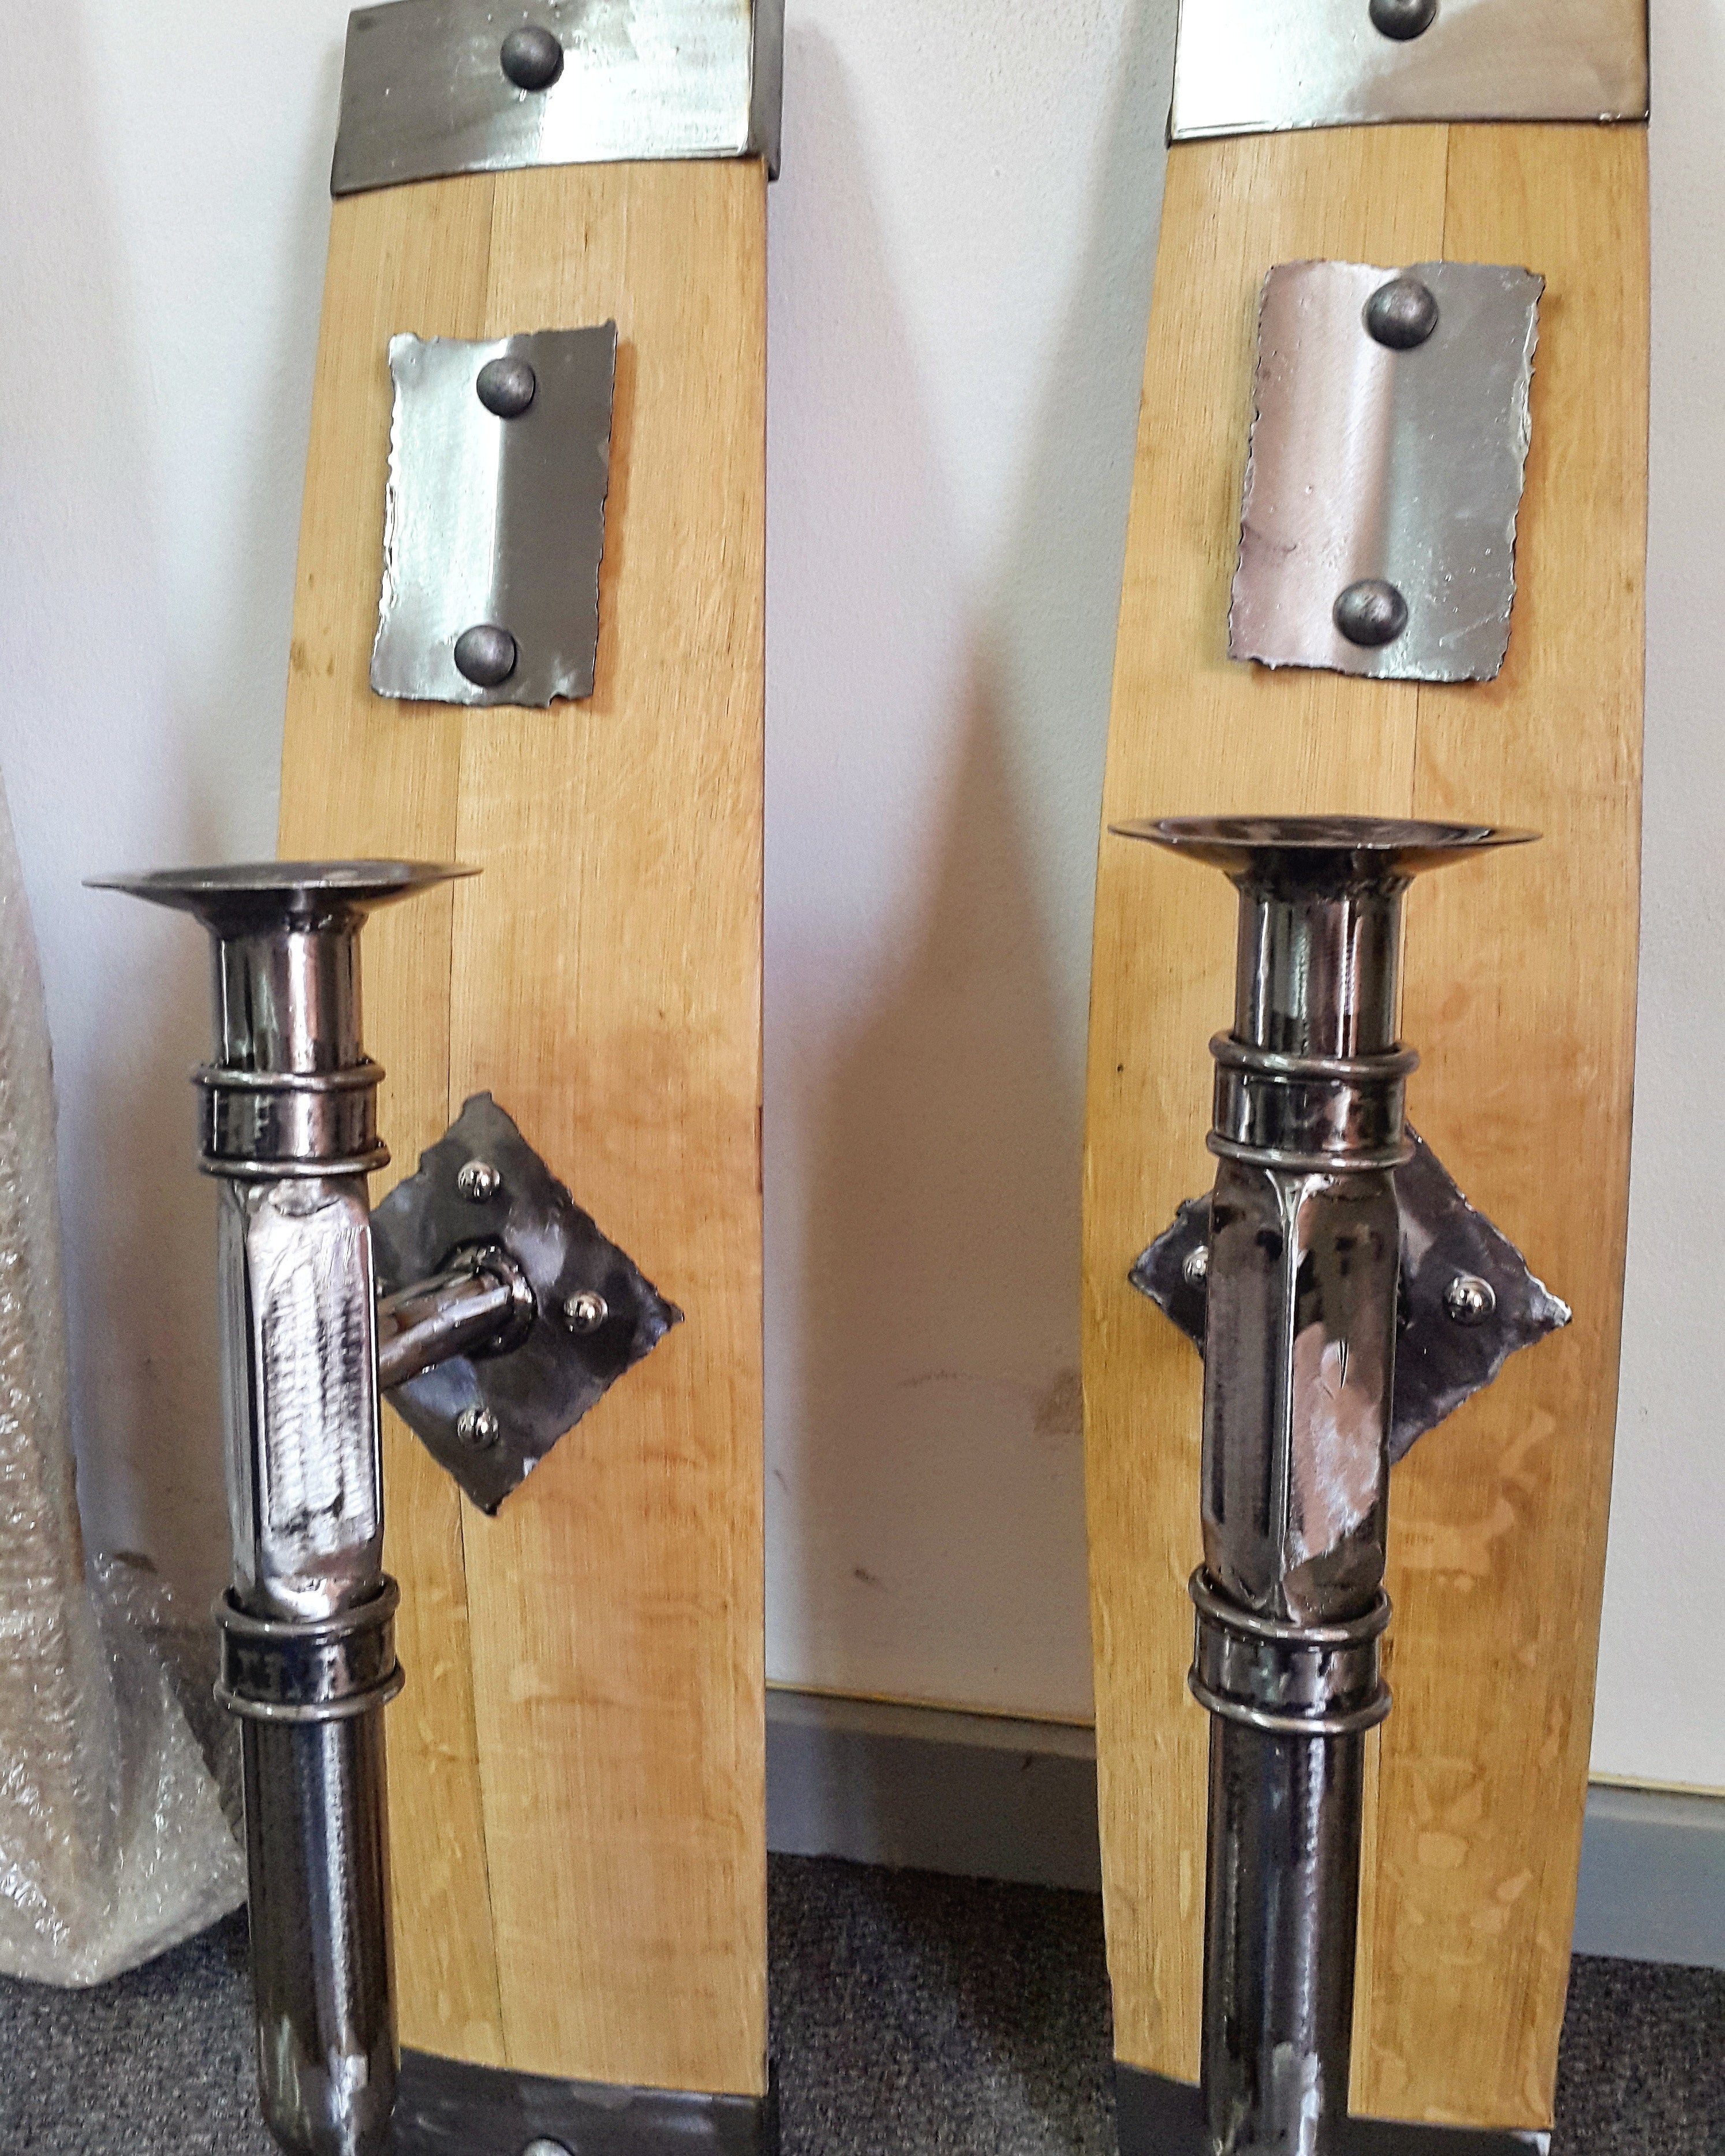 Medieval candlestick holders made from reclaimed french oak wine barrels with decor studs